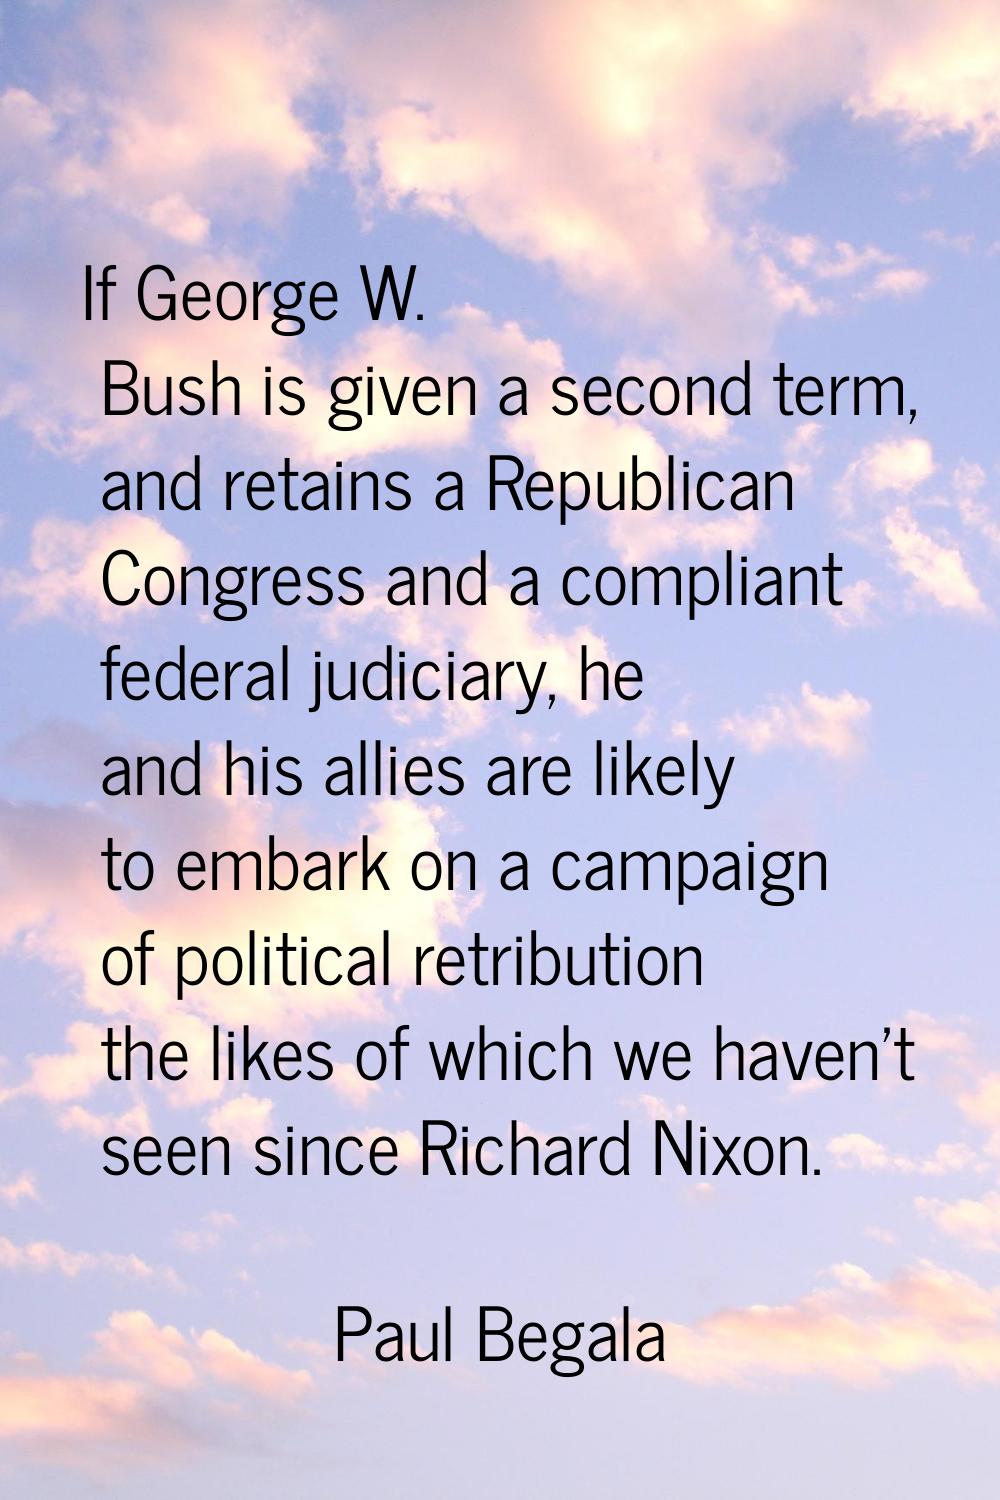 If George W. Bush is given a second term, and retains a Republican Congress and a compliant federal